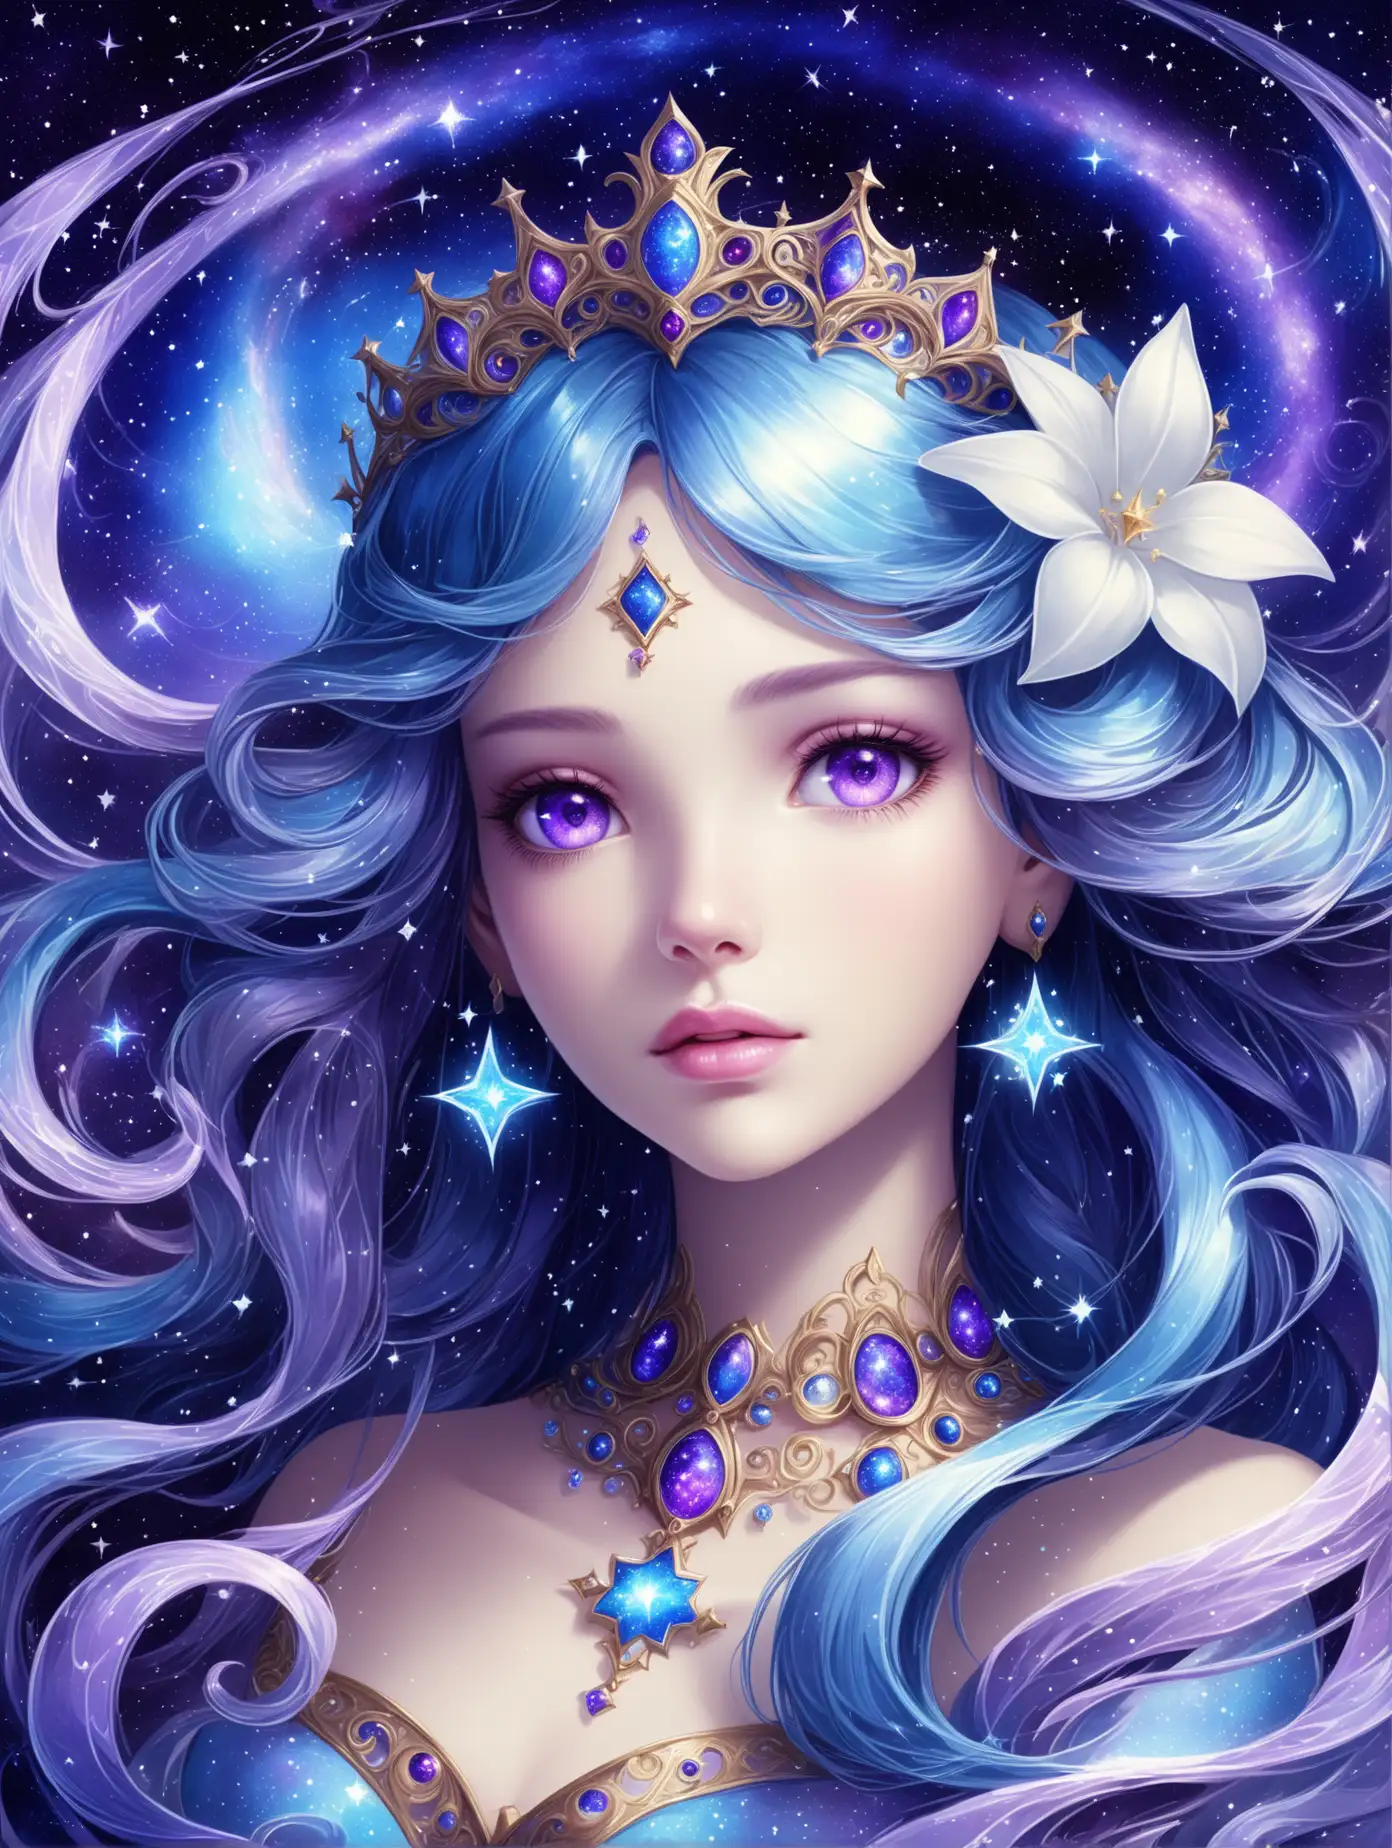 Celestial Princess Portrait with Galaxy Background and Magical Aura